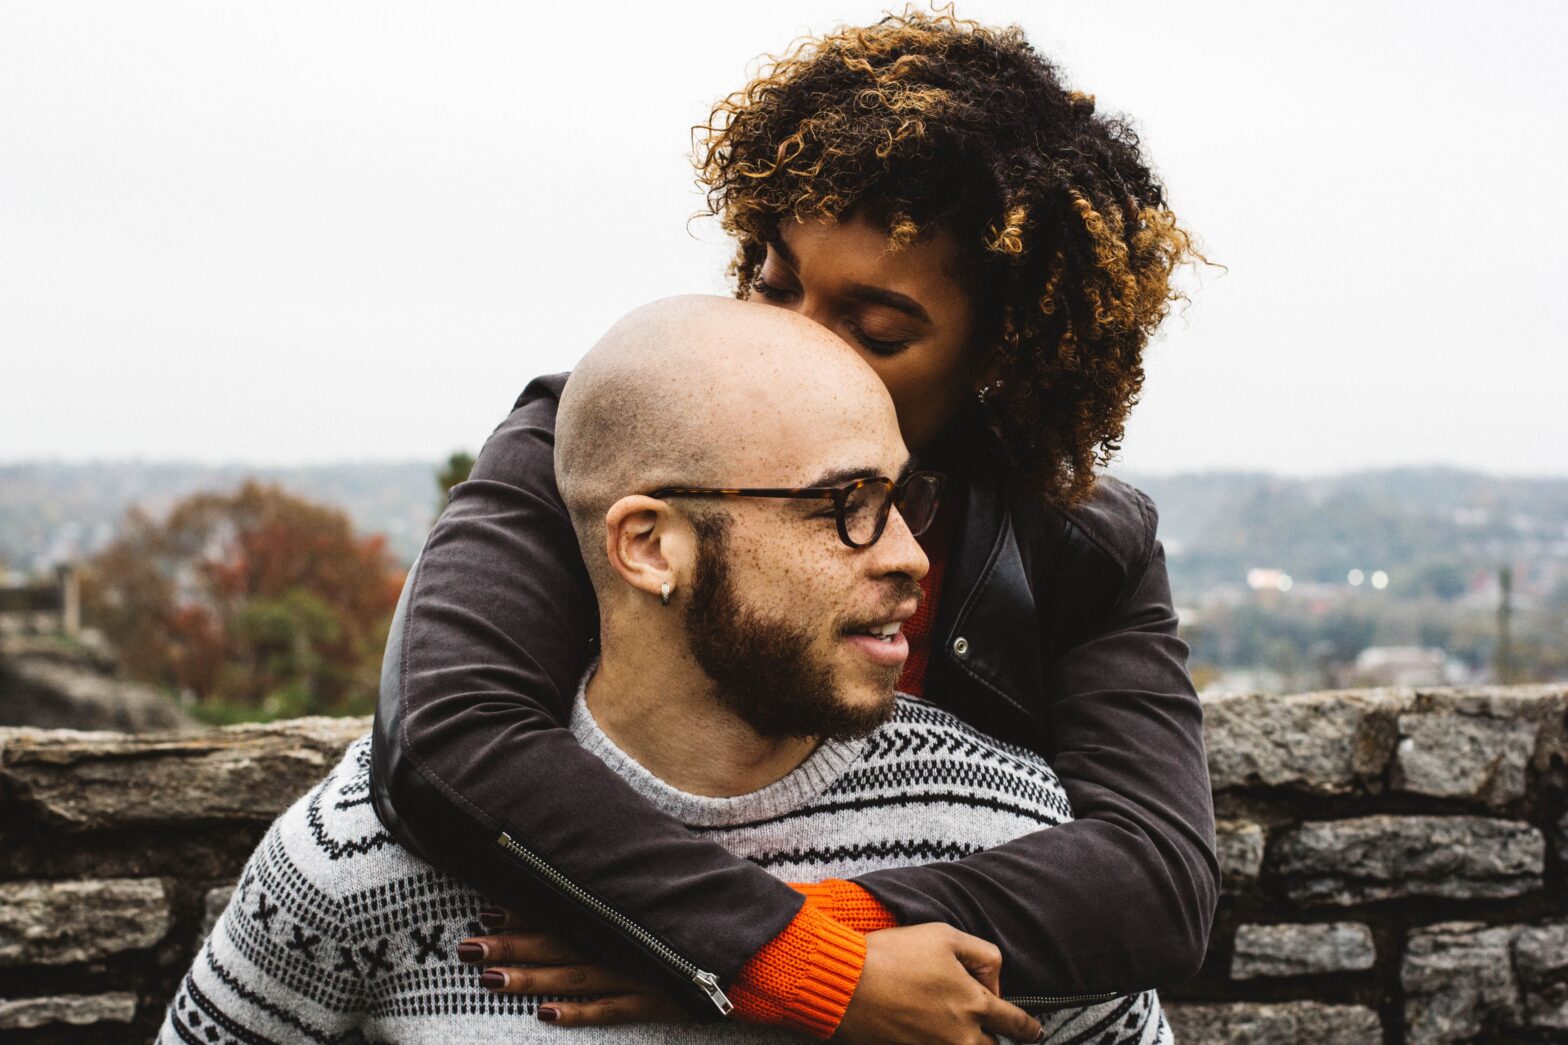 Why Every First Date Should Be A Baecation, According To This Traveler